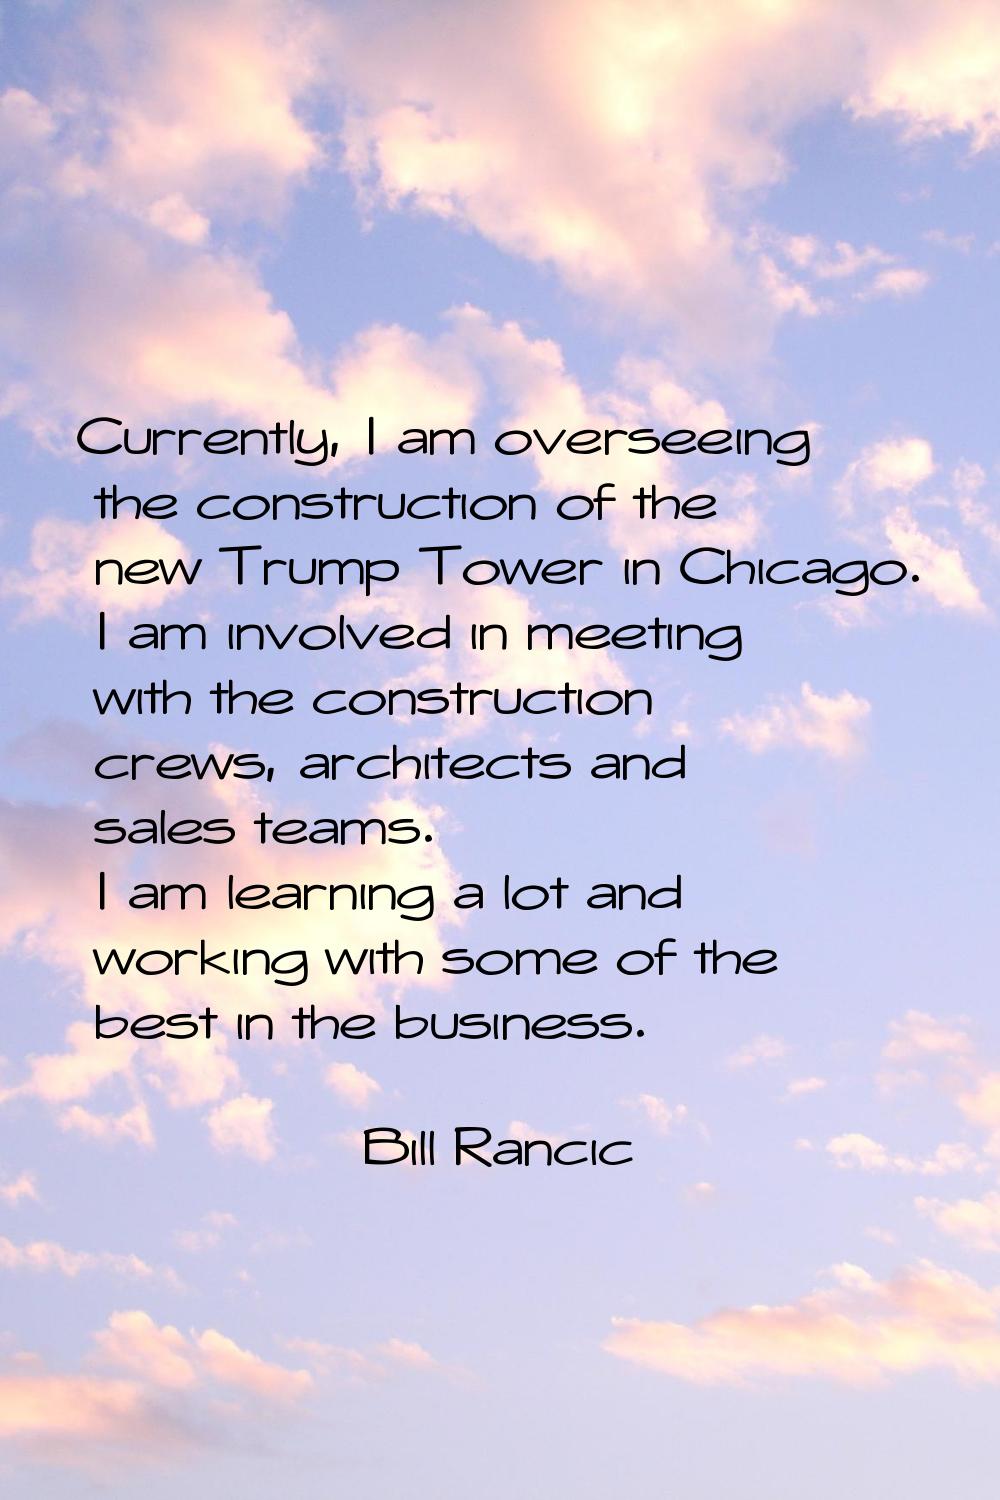 Currently, I am overseeing the construction of the new Trump Tower in Chicago. I am involved in mee